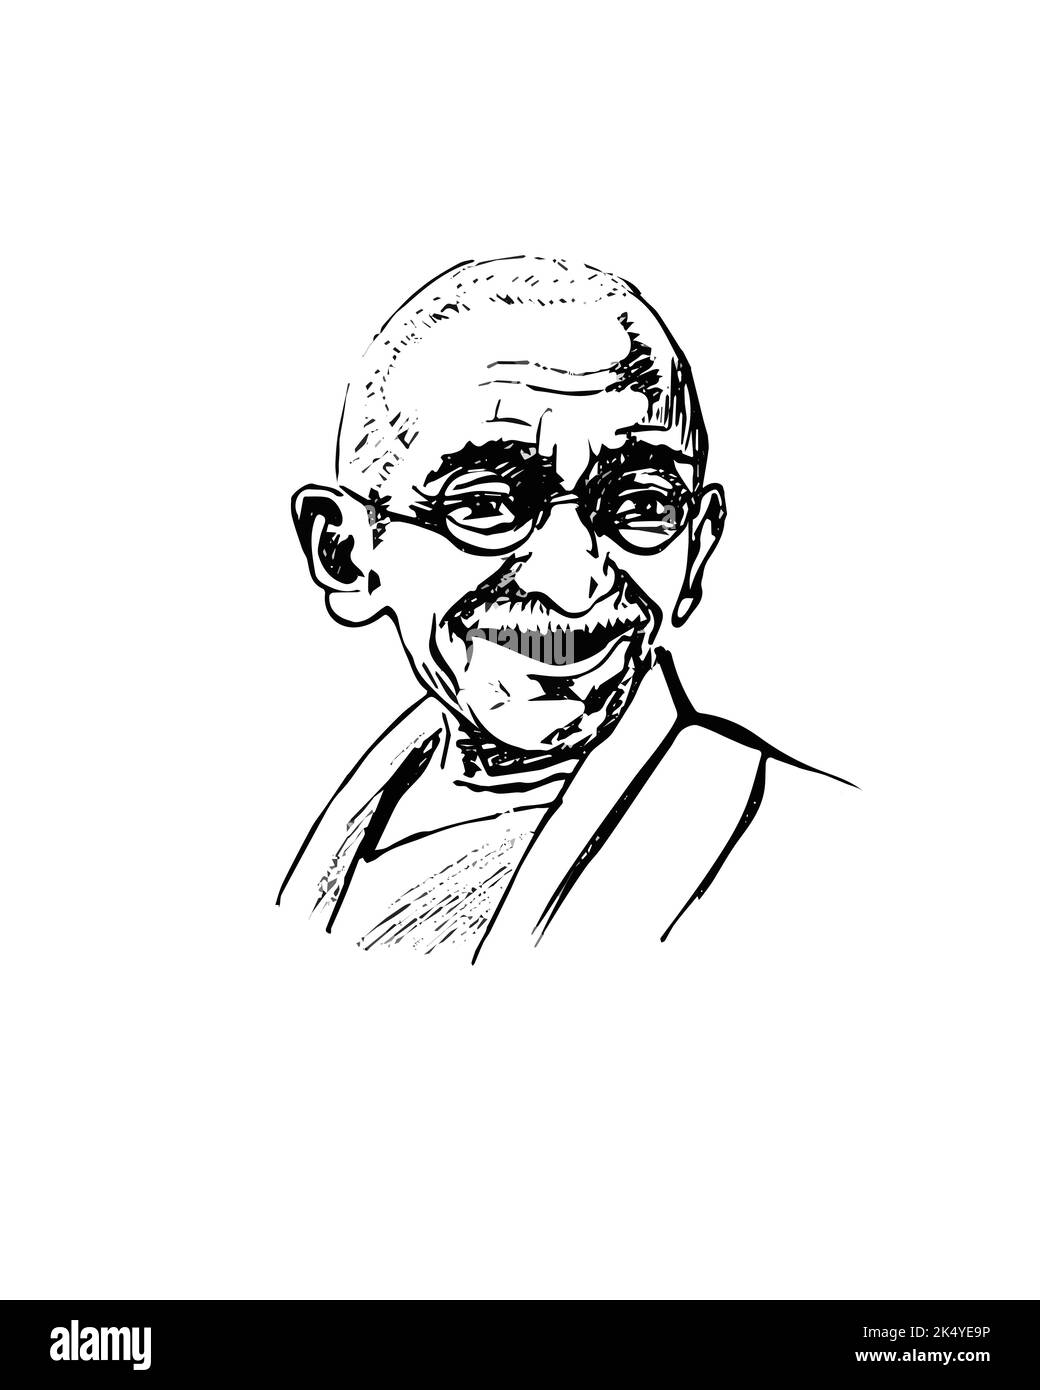 Mohandas Karamchand Gandhi doodle. Smiling Mahatma hand drawn image. World famous leader of Independence movement against British rule in India Stock Vector